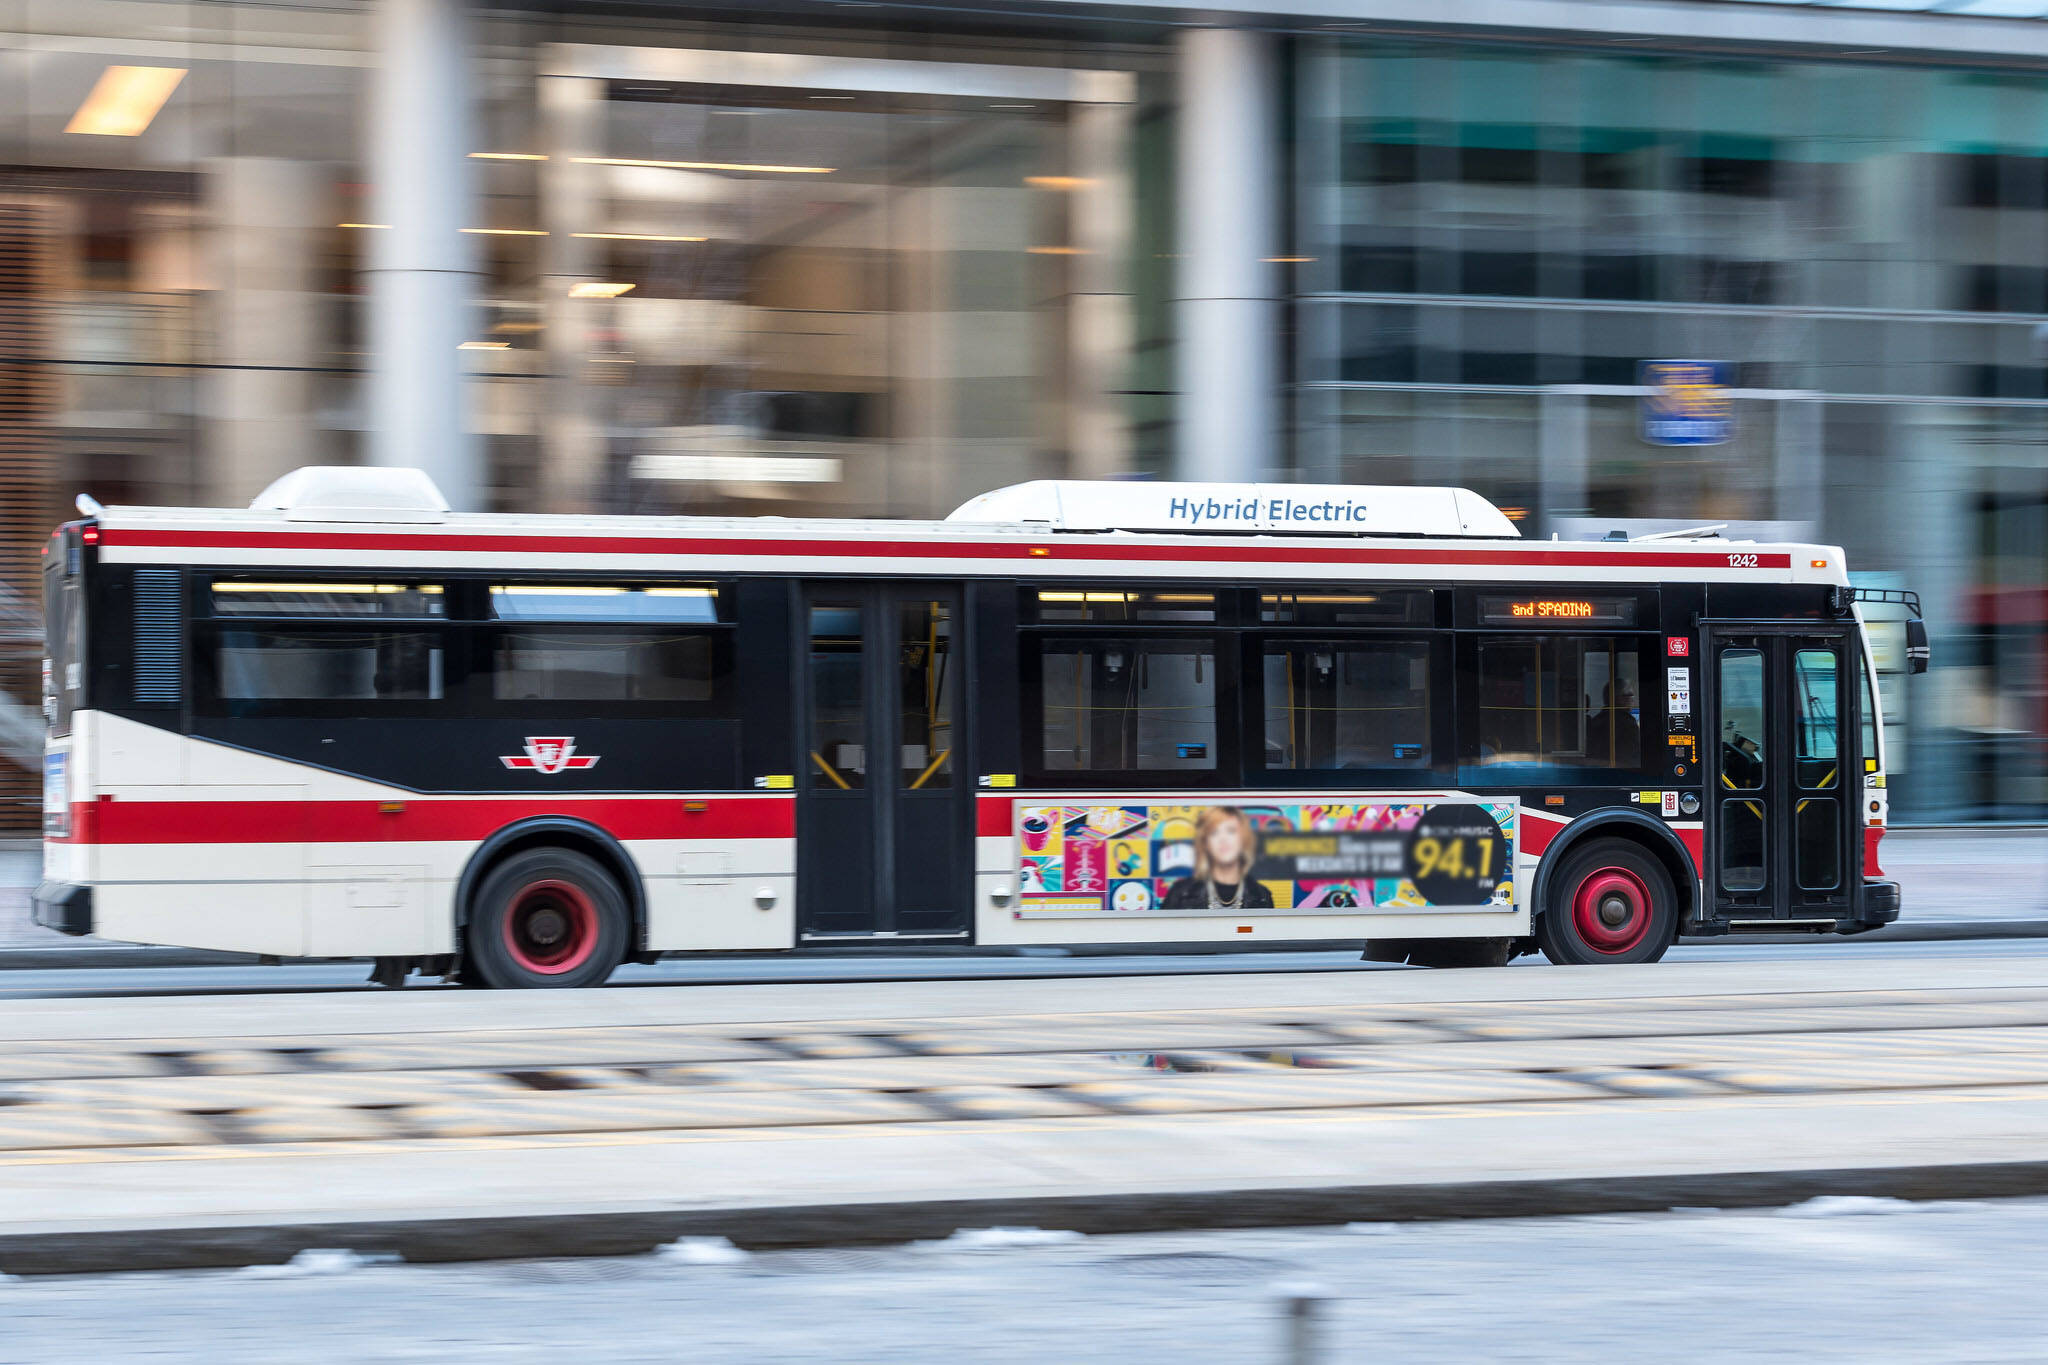 20180423 Ttc New Buses ?w=2048&cmd=resize Then Crop&height=1365&quality=70